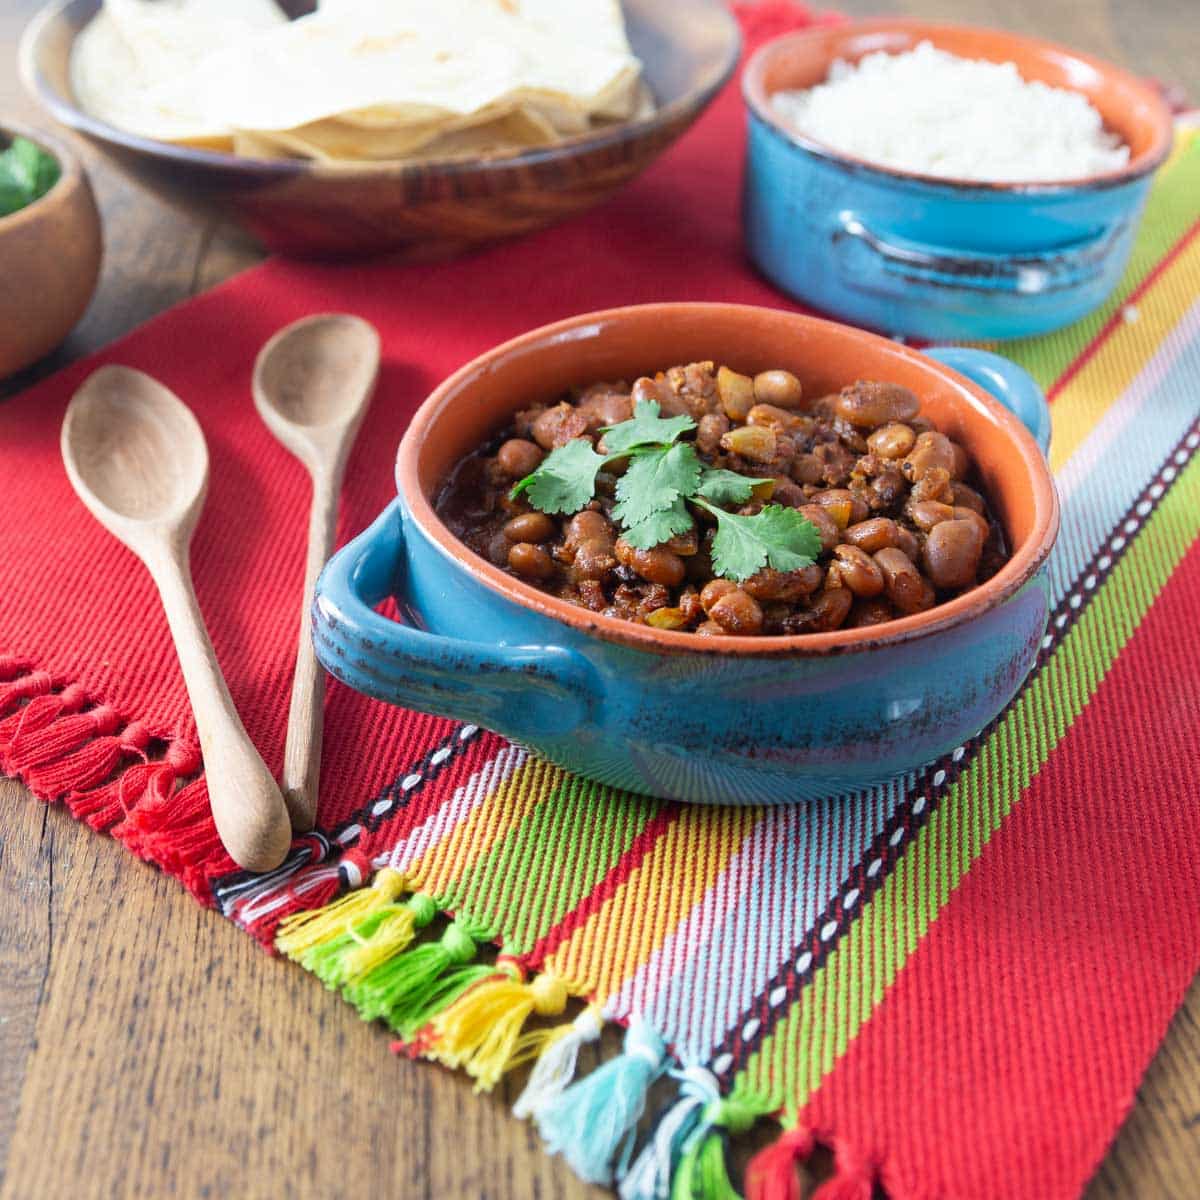 A photo of frijoles charros in a ceramic bowl with tortillas and rice in the background.